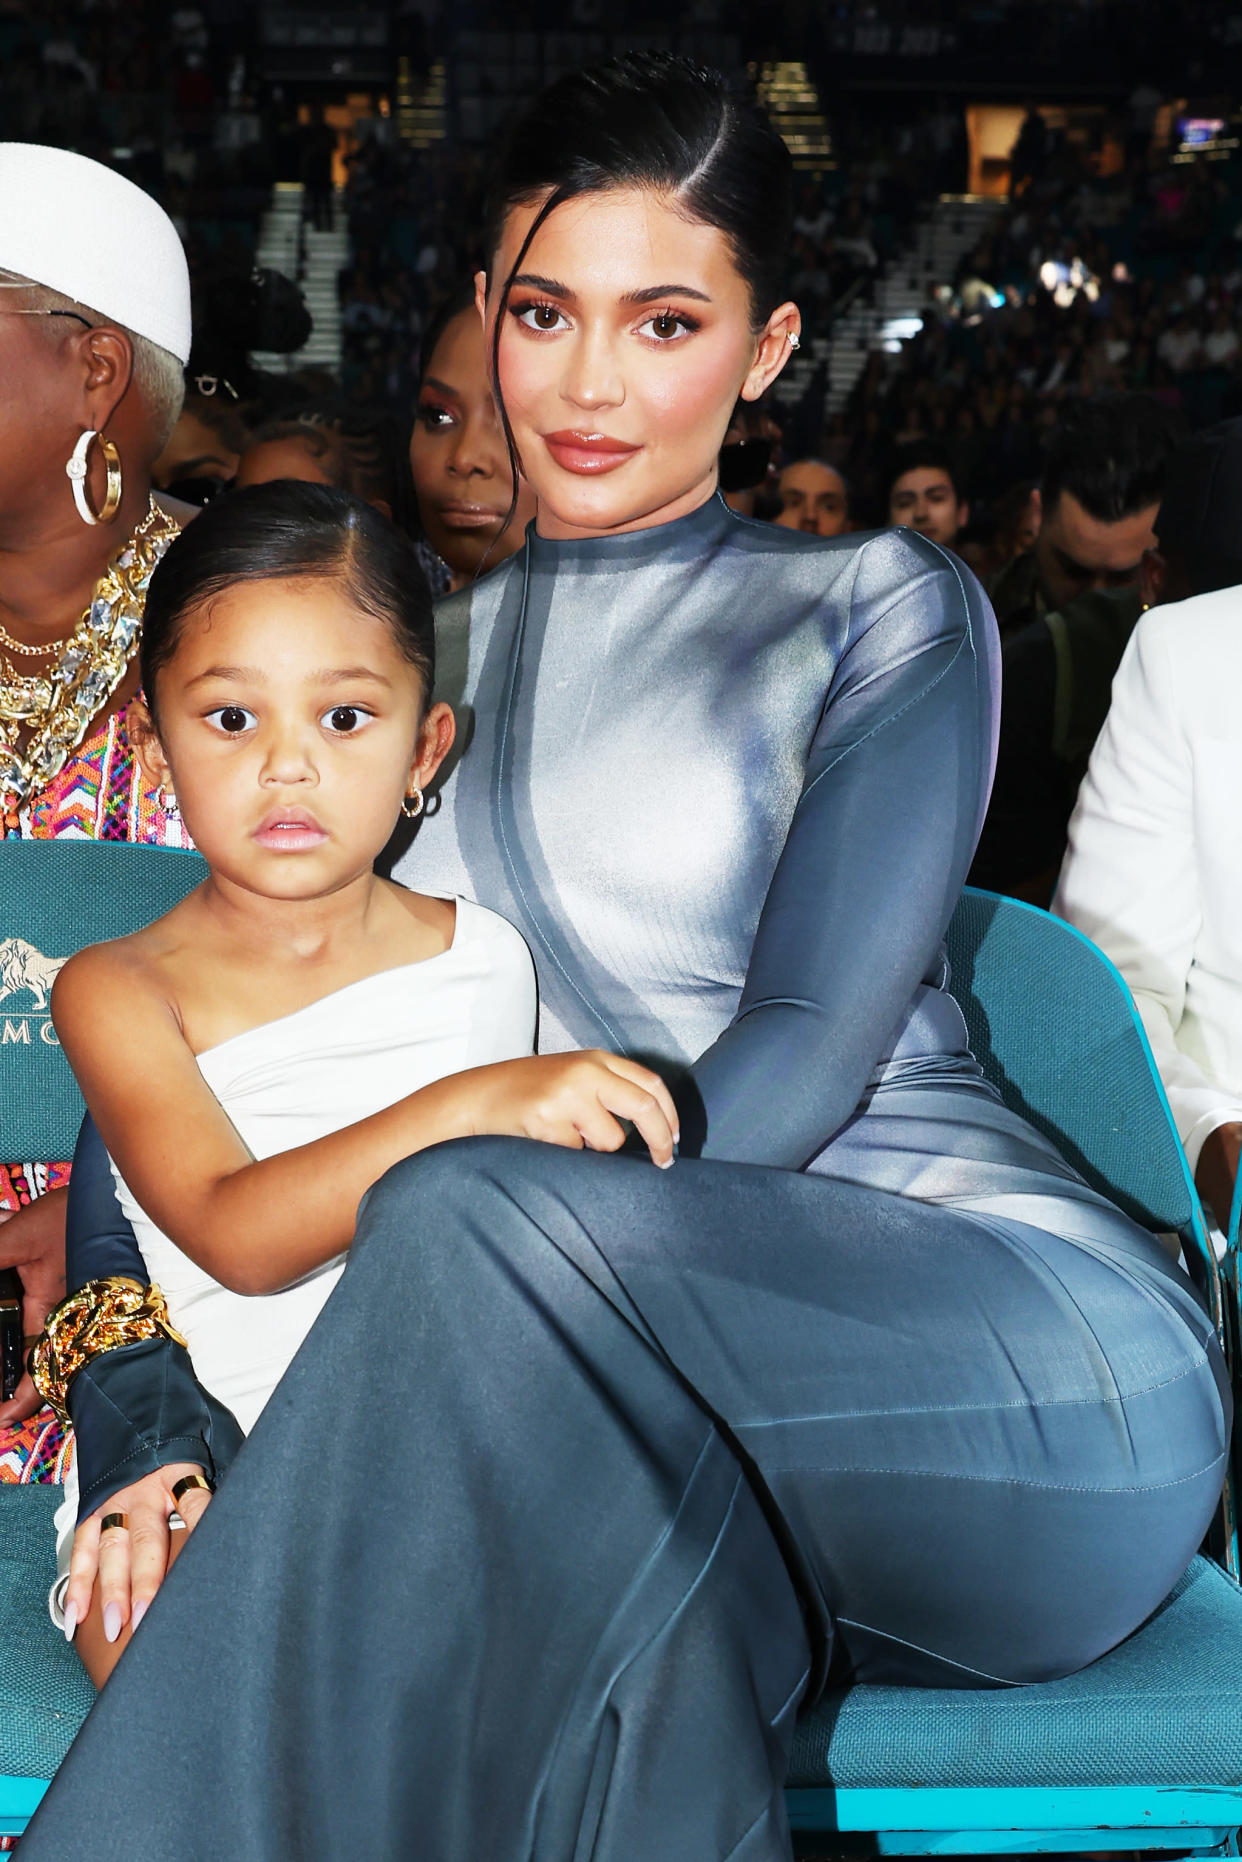 Stormi poses with her mother, Kylie Jenner. (Photo by Christopher Polk/NBC/NBCU Photo Bank via Getty Images)